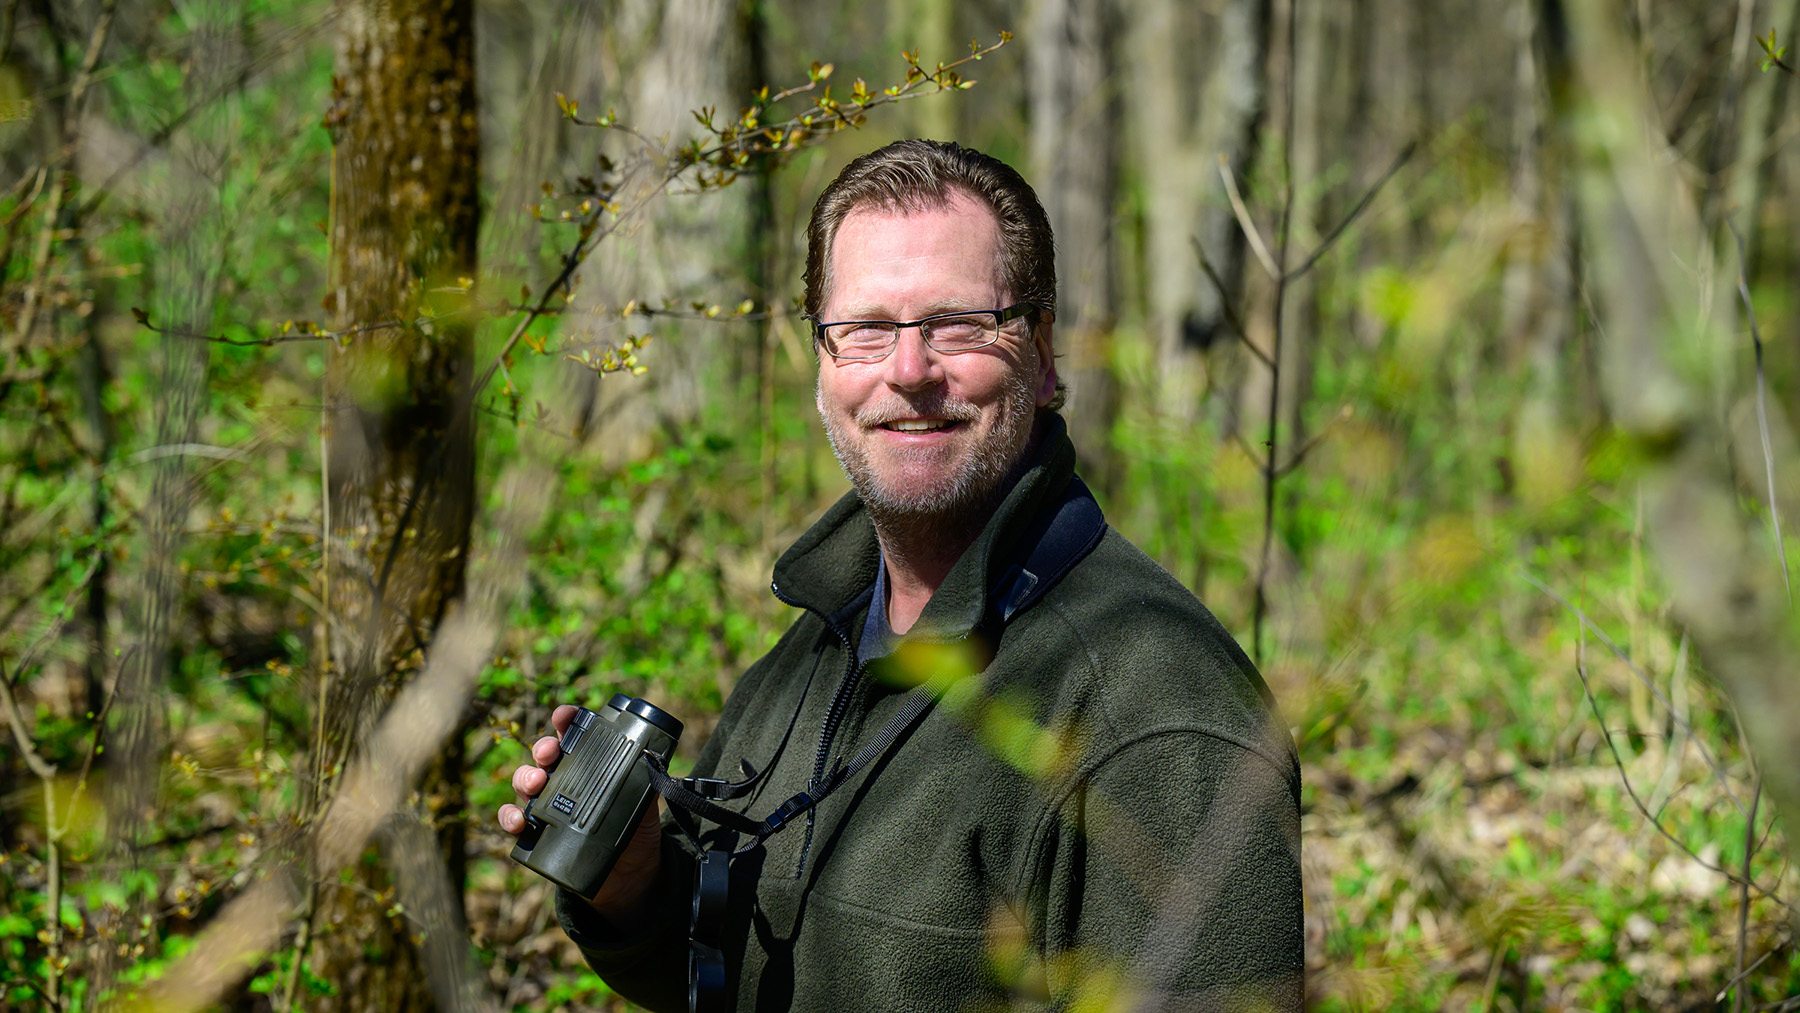 Illinois Natural History Survey avian ecologist Jeff Hoover. Photo by Fred Zwicky.